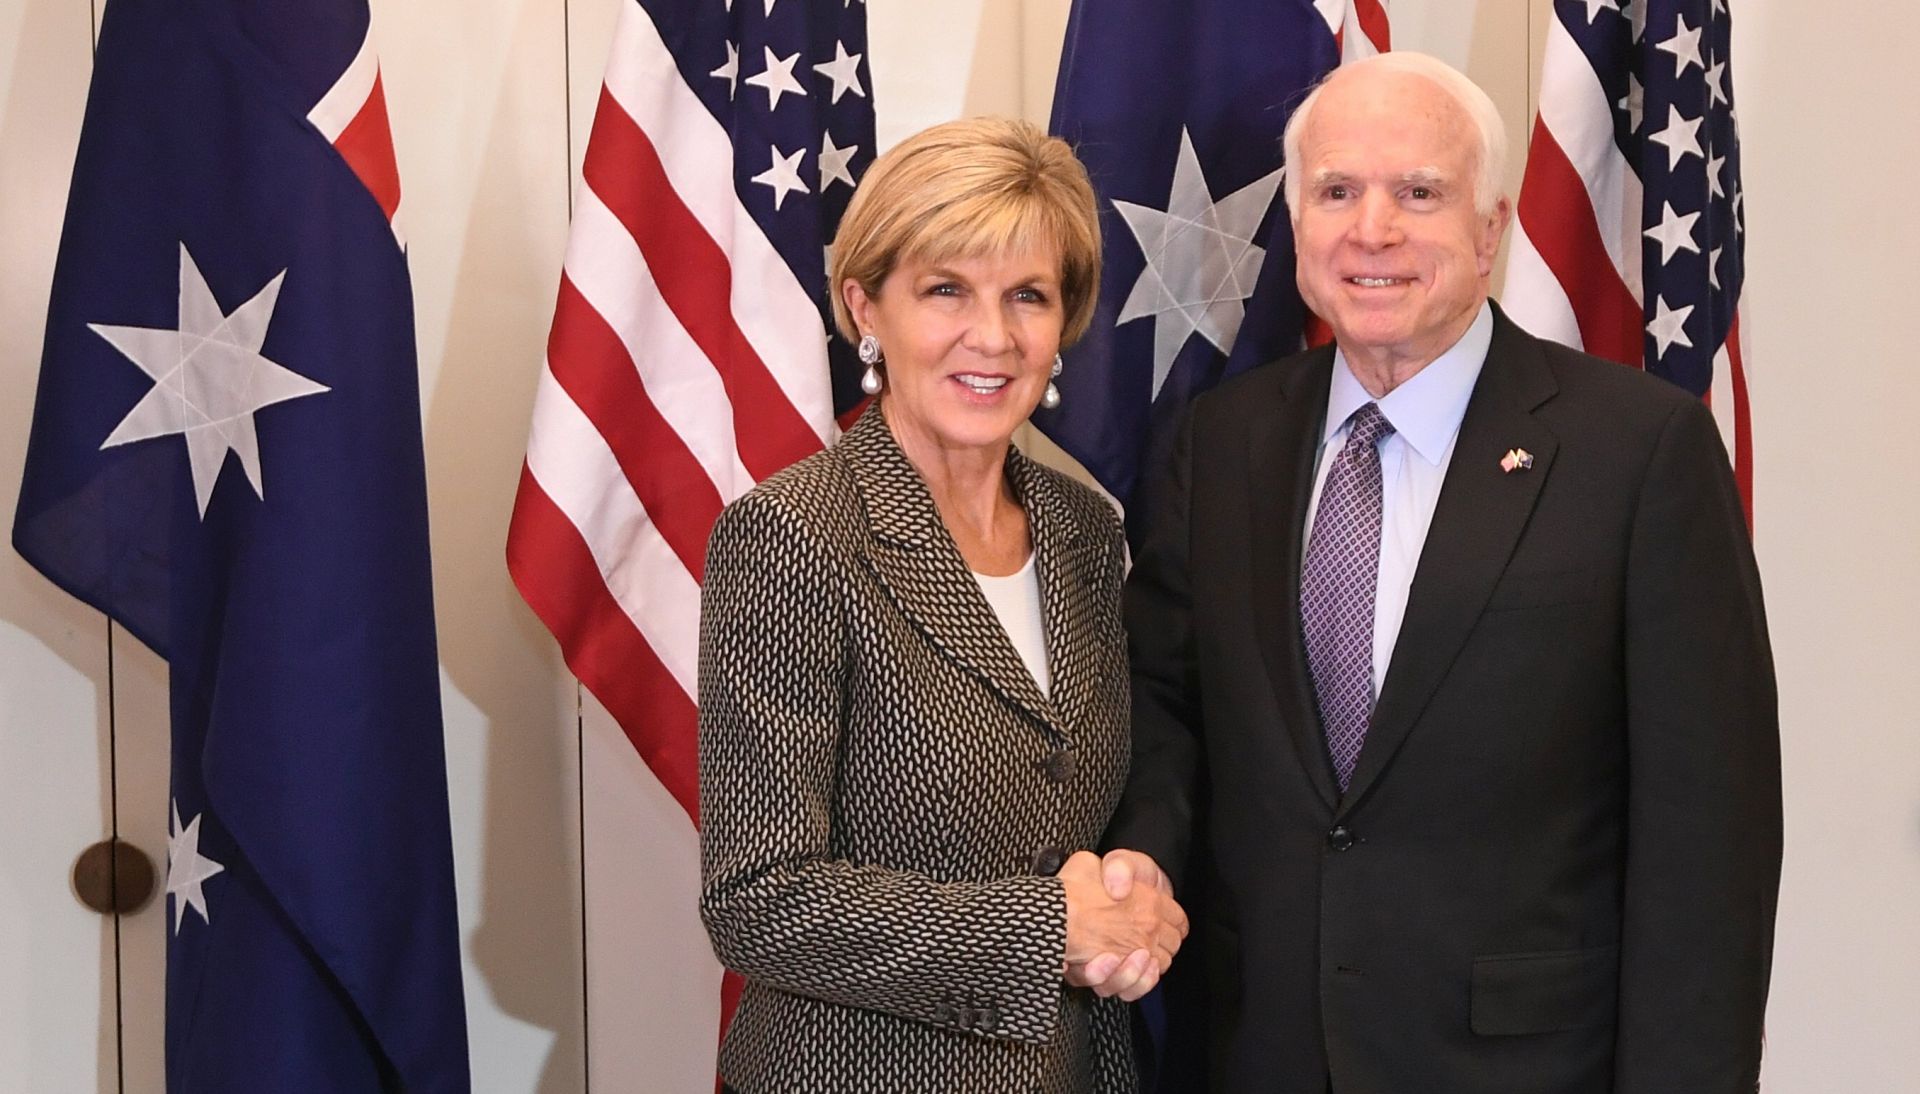 epa05996786 US Senator from Arizona John McCain (R) shakes hands with Australian Foreign Minister Julie Bishop ahead of a meeting at Parliament House in Canberra, Australian Capital Territory, Australia, 29 May 2017. McCain is visiting Australia for talks on security in the Asia-Pacific region, media reported.  EPA/LUKAS COCH  AUSTRALIA AND NEW ZEALAND OUT